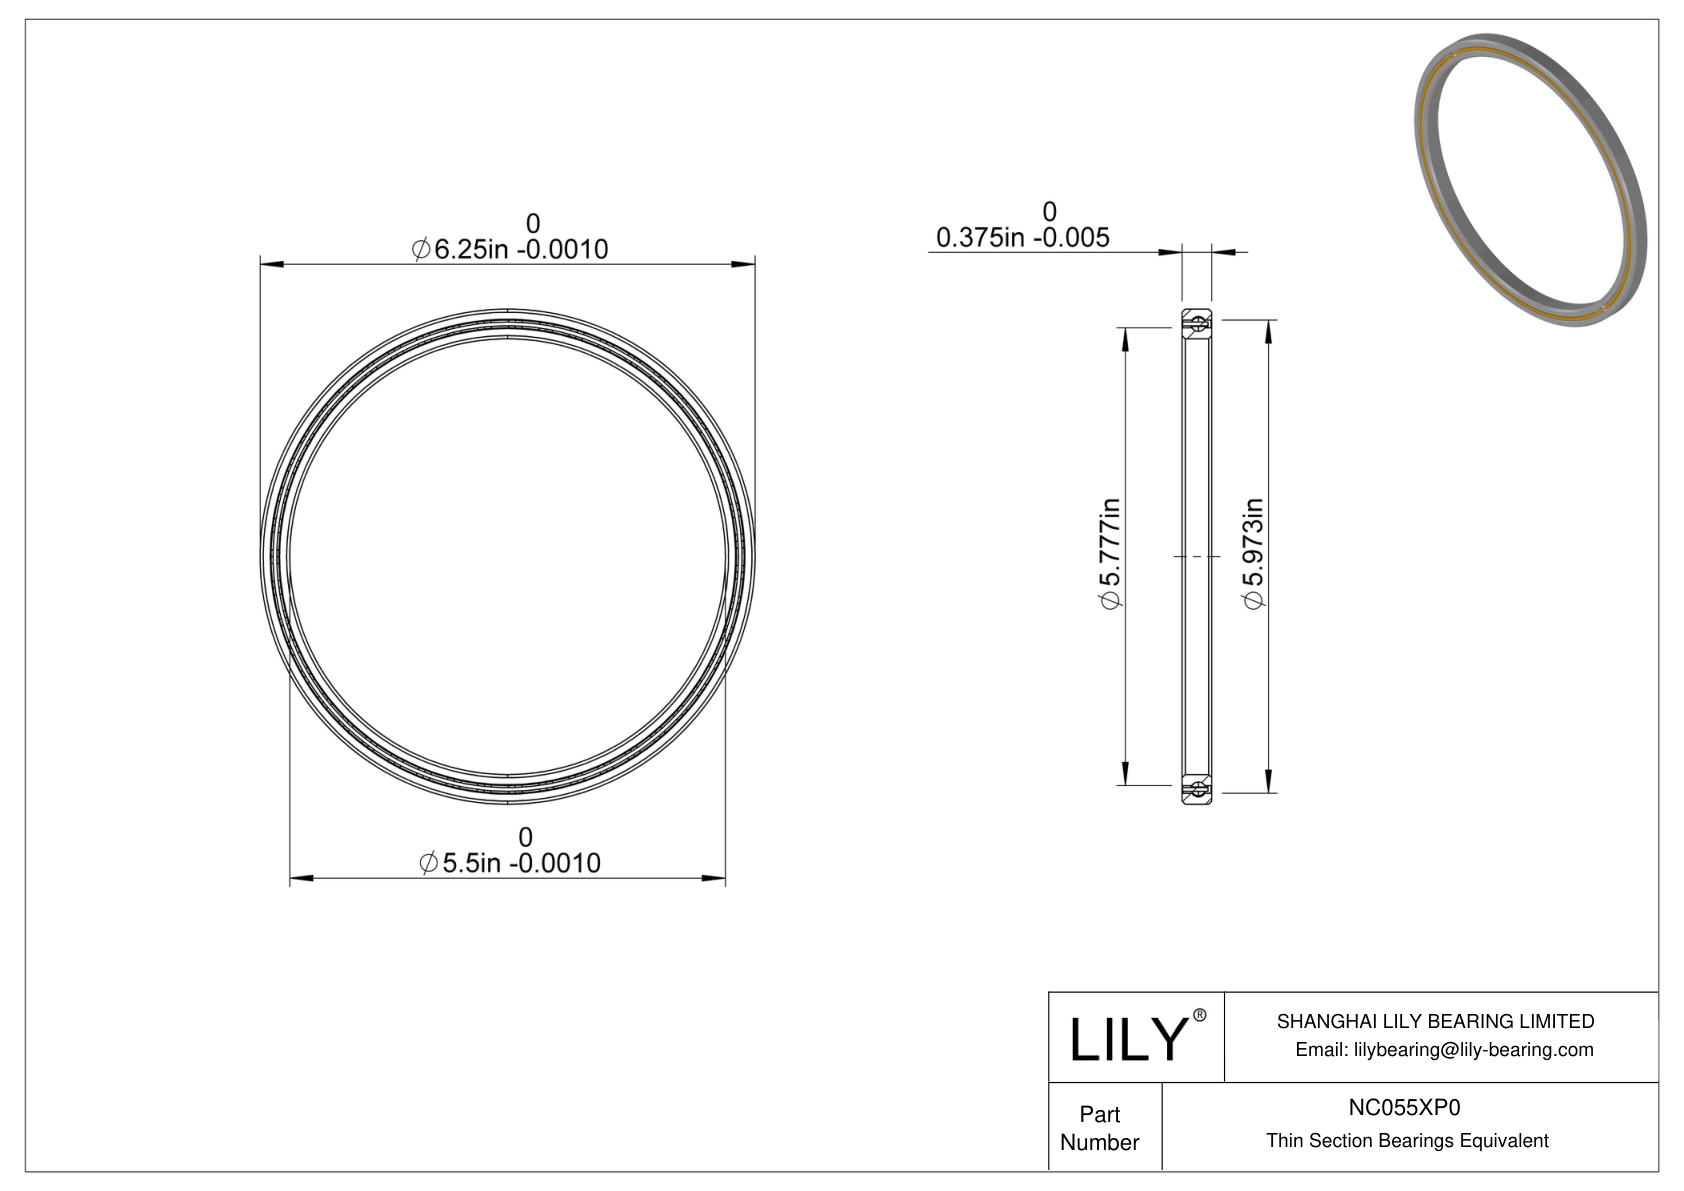 NC055XP0 Constant Section (CS) Bearings cad drawing